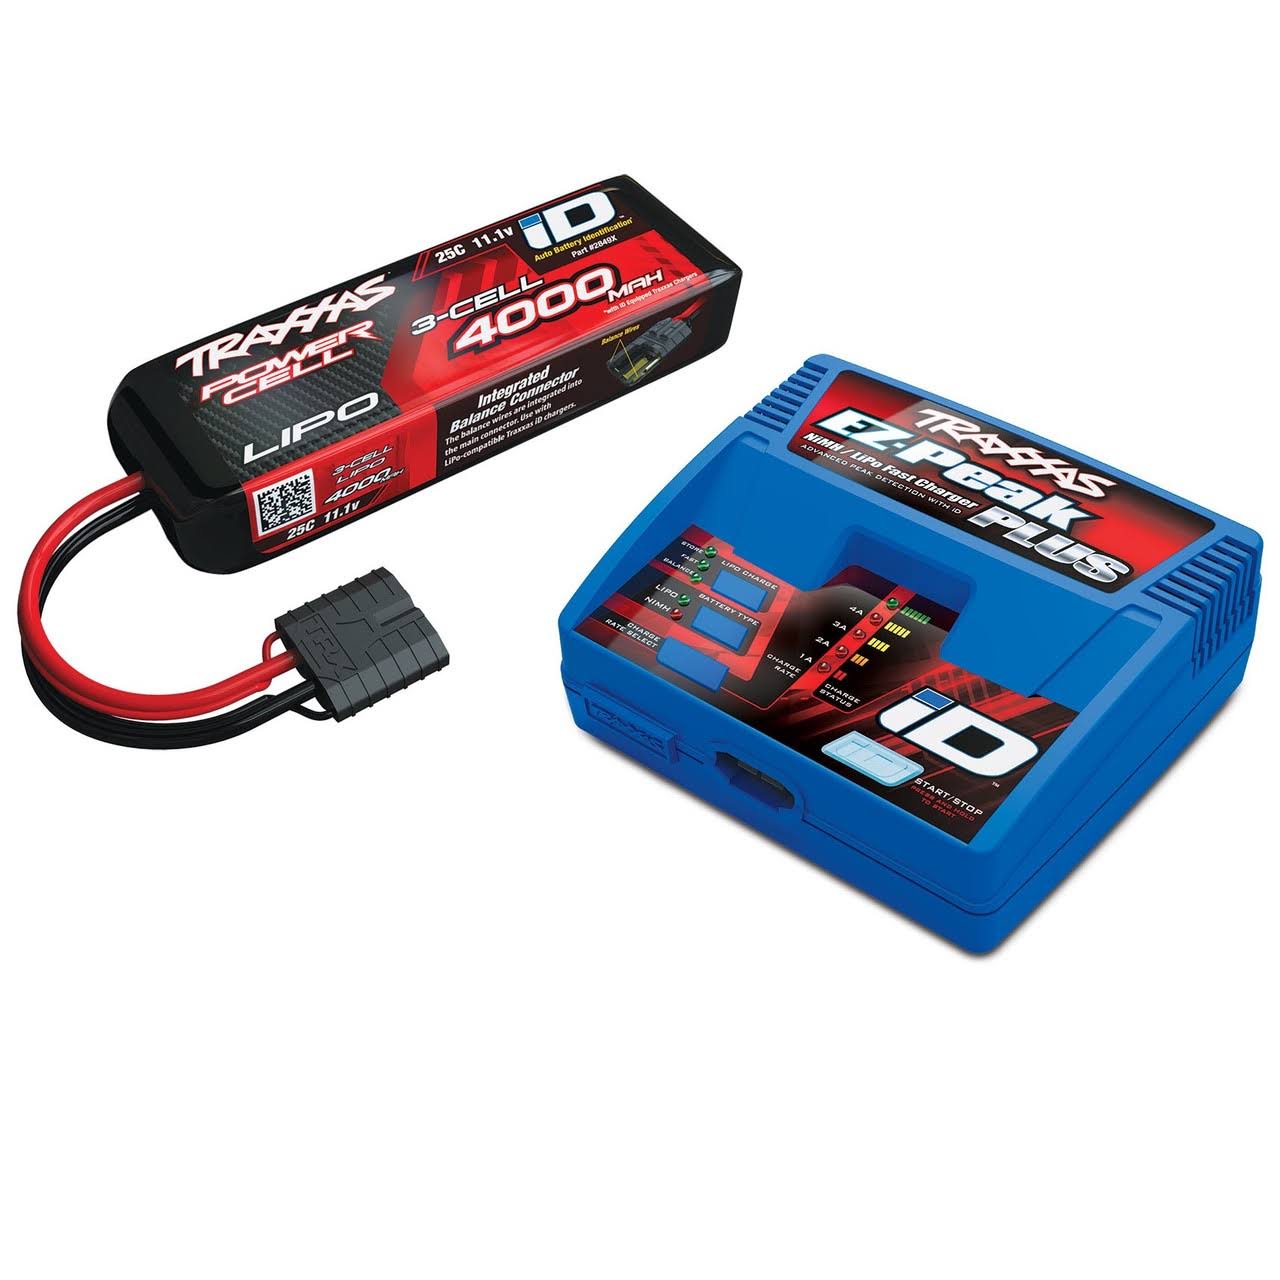 traxxas 2994 battery charger completer set: 2849x battery 1/ 2970 charger